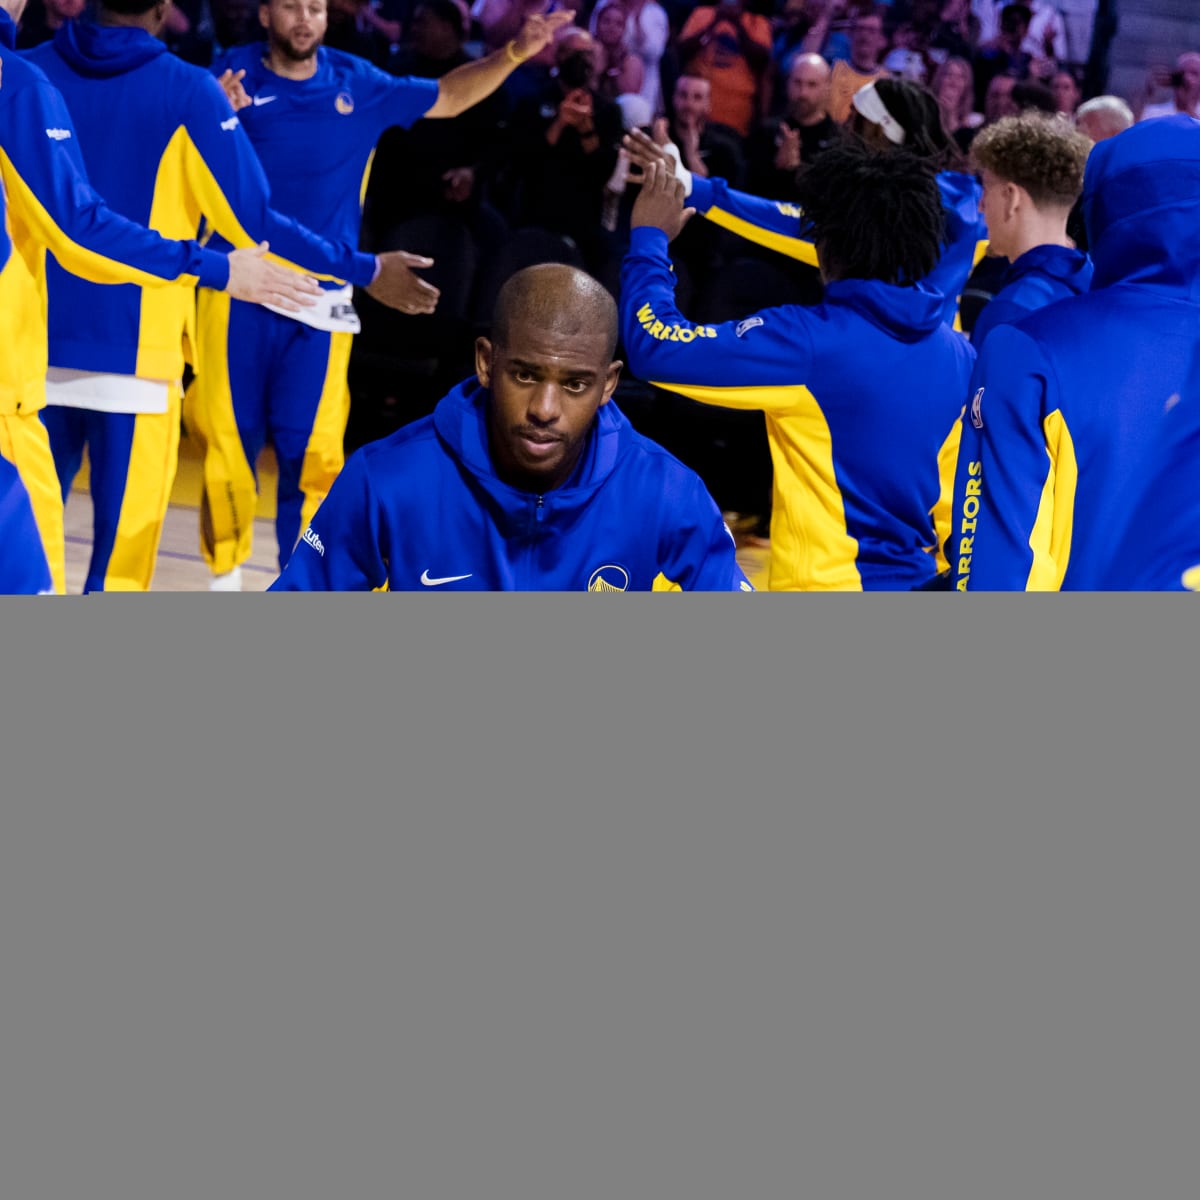 3 things noticed from Chris Paul's Golden State Warriors unveiling picture  as fans react - Basketball - Sports - Daily Express US